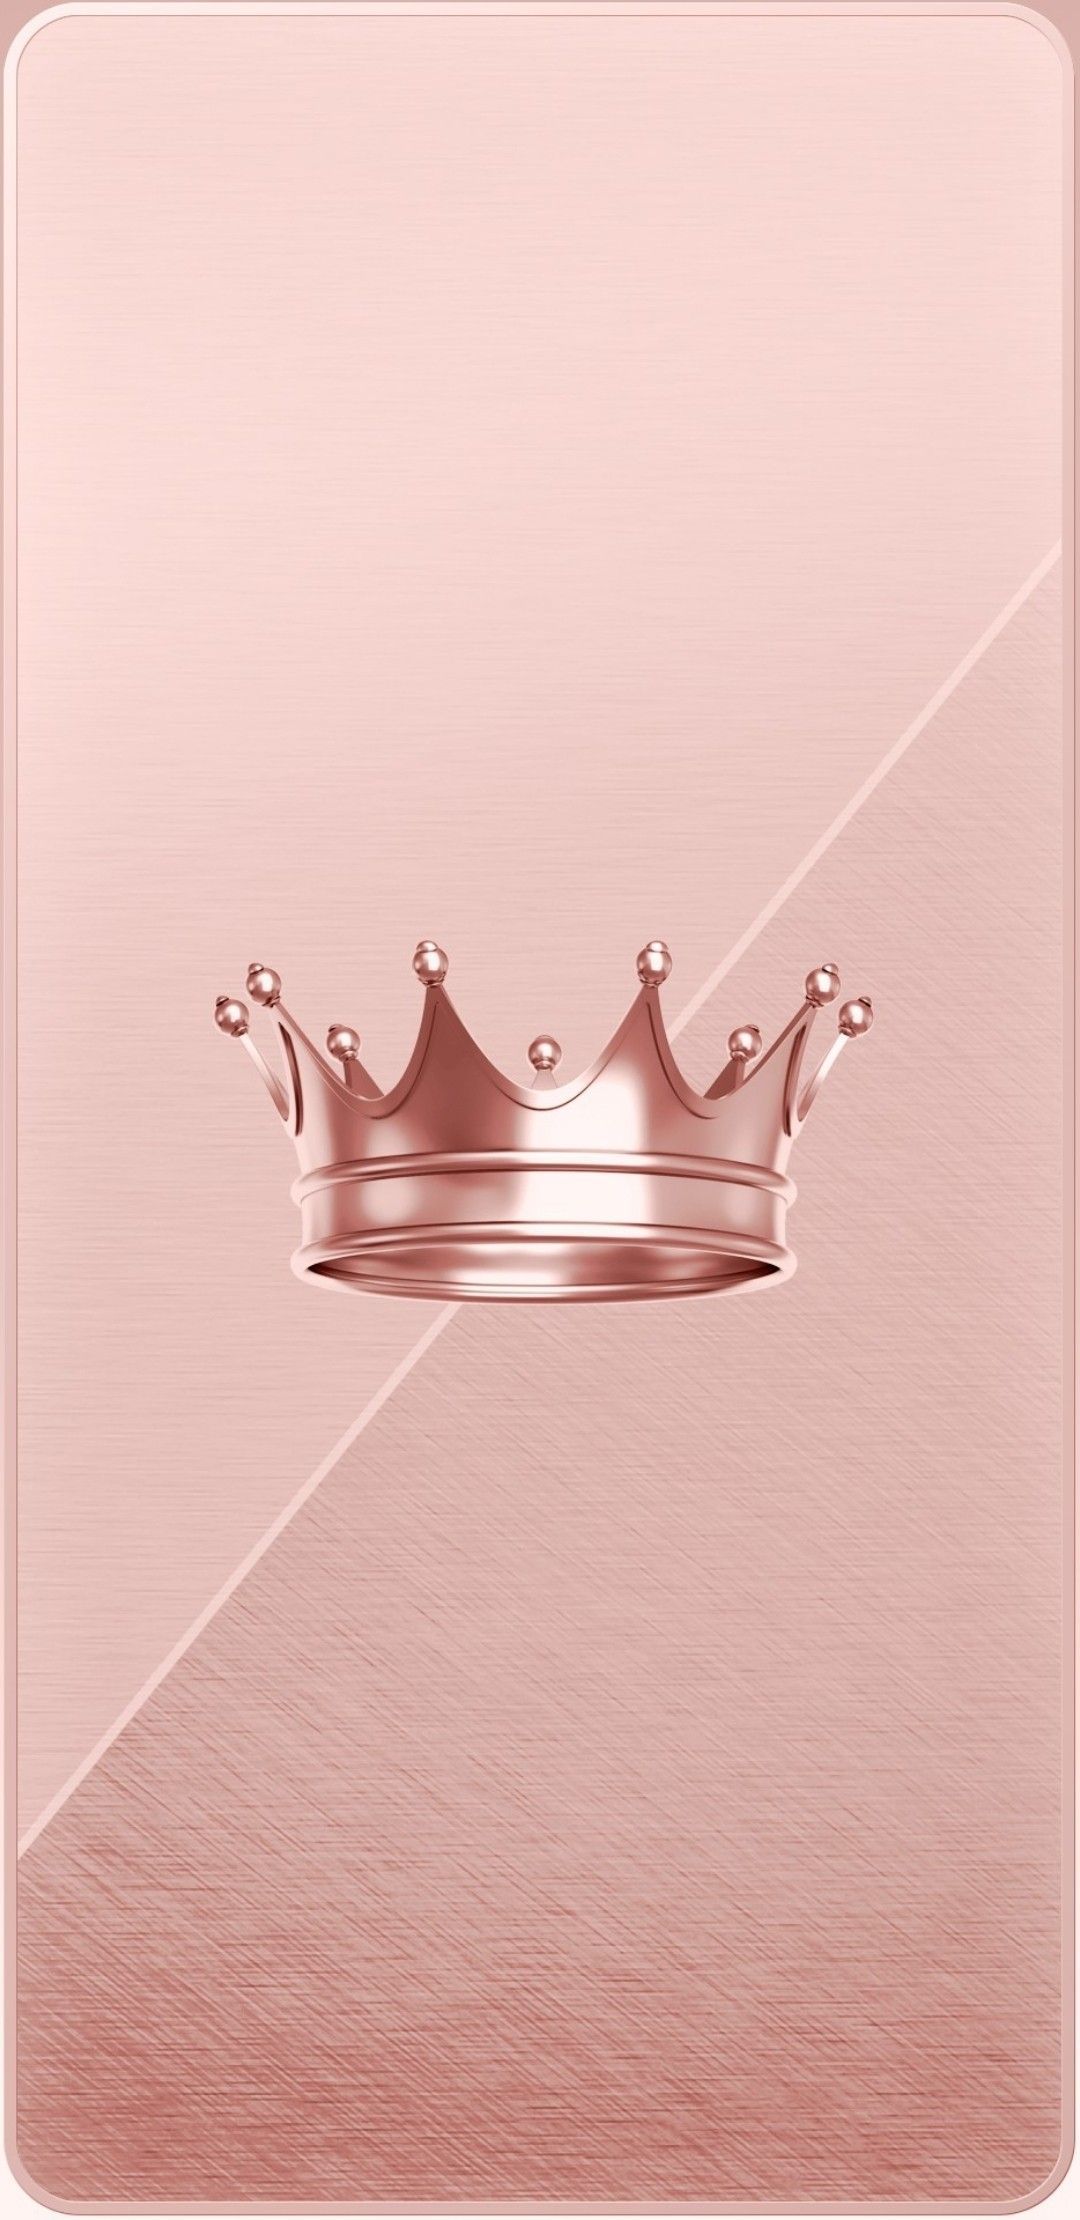 Wallpaper.By Artist Unknown. Cute home screen wallpaper, Cute home screens, Queen wallpaper crown